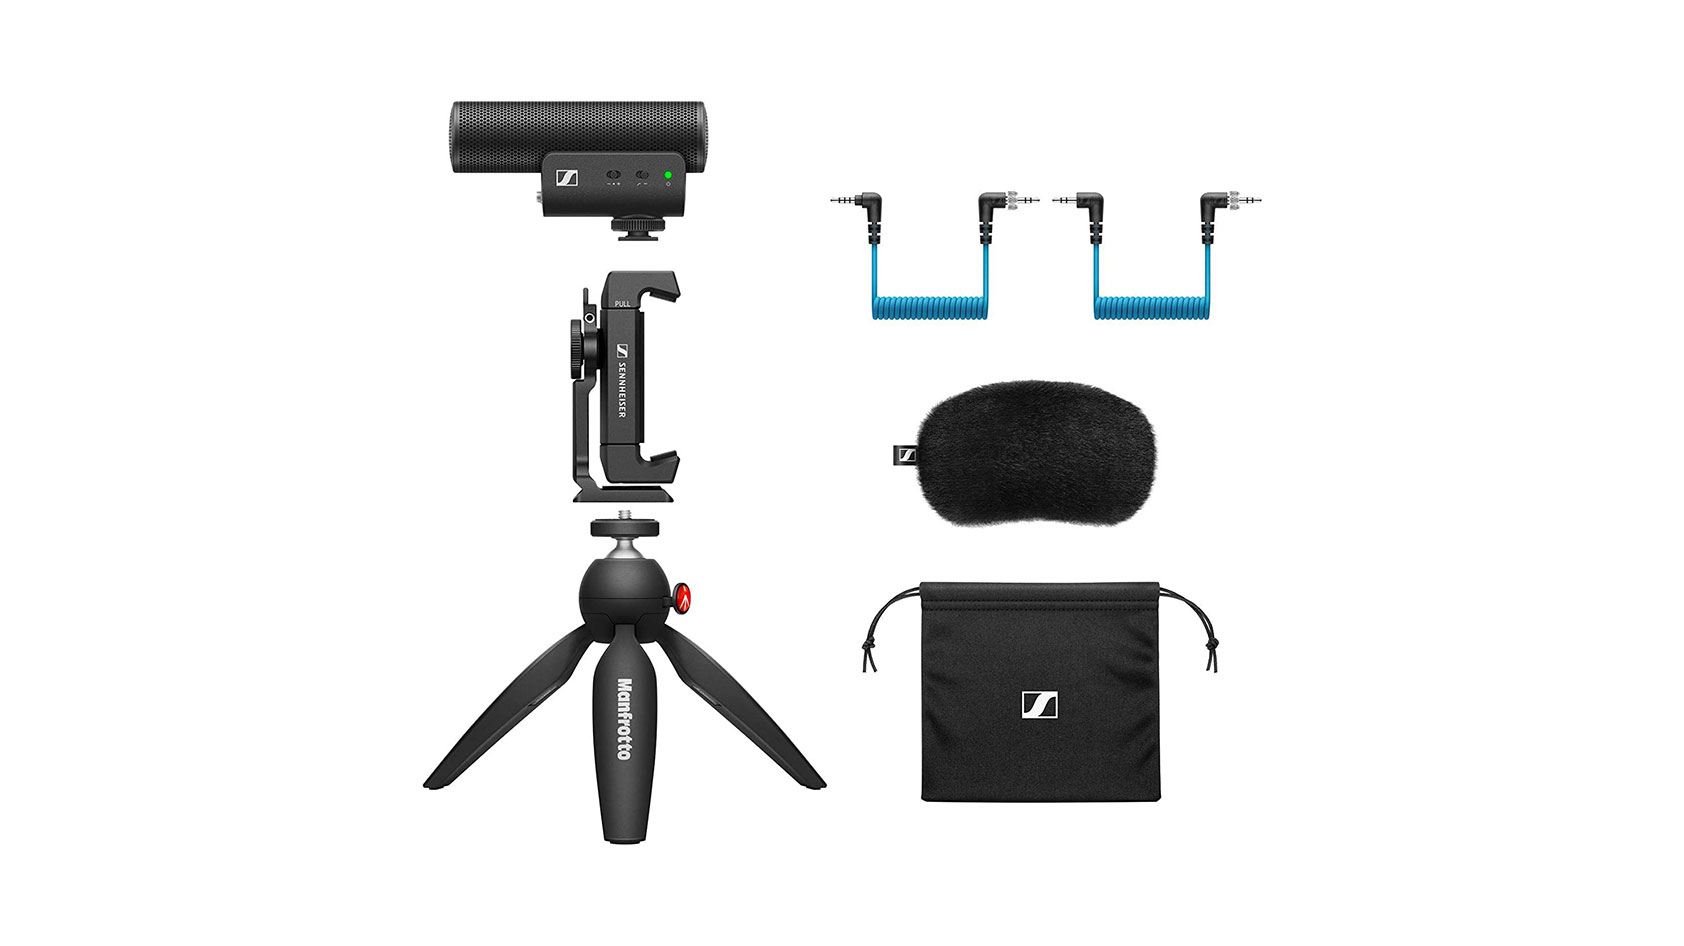 The Shure MKE 400 Mobile Kit product image against a white background.